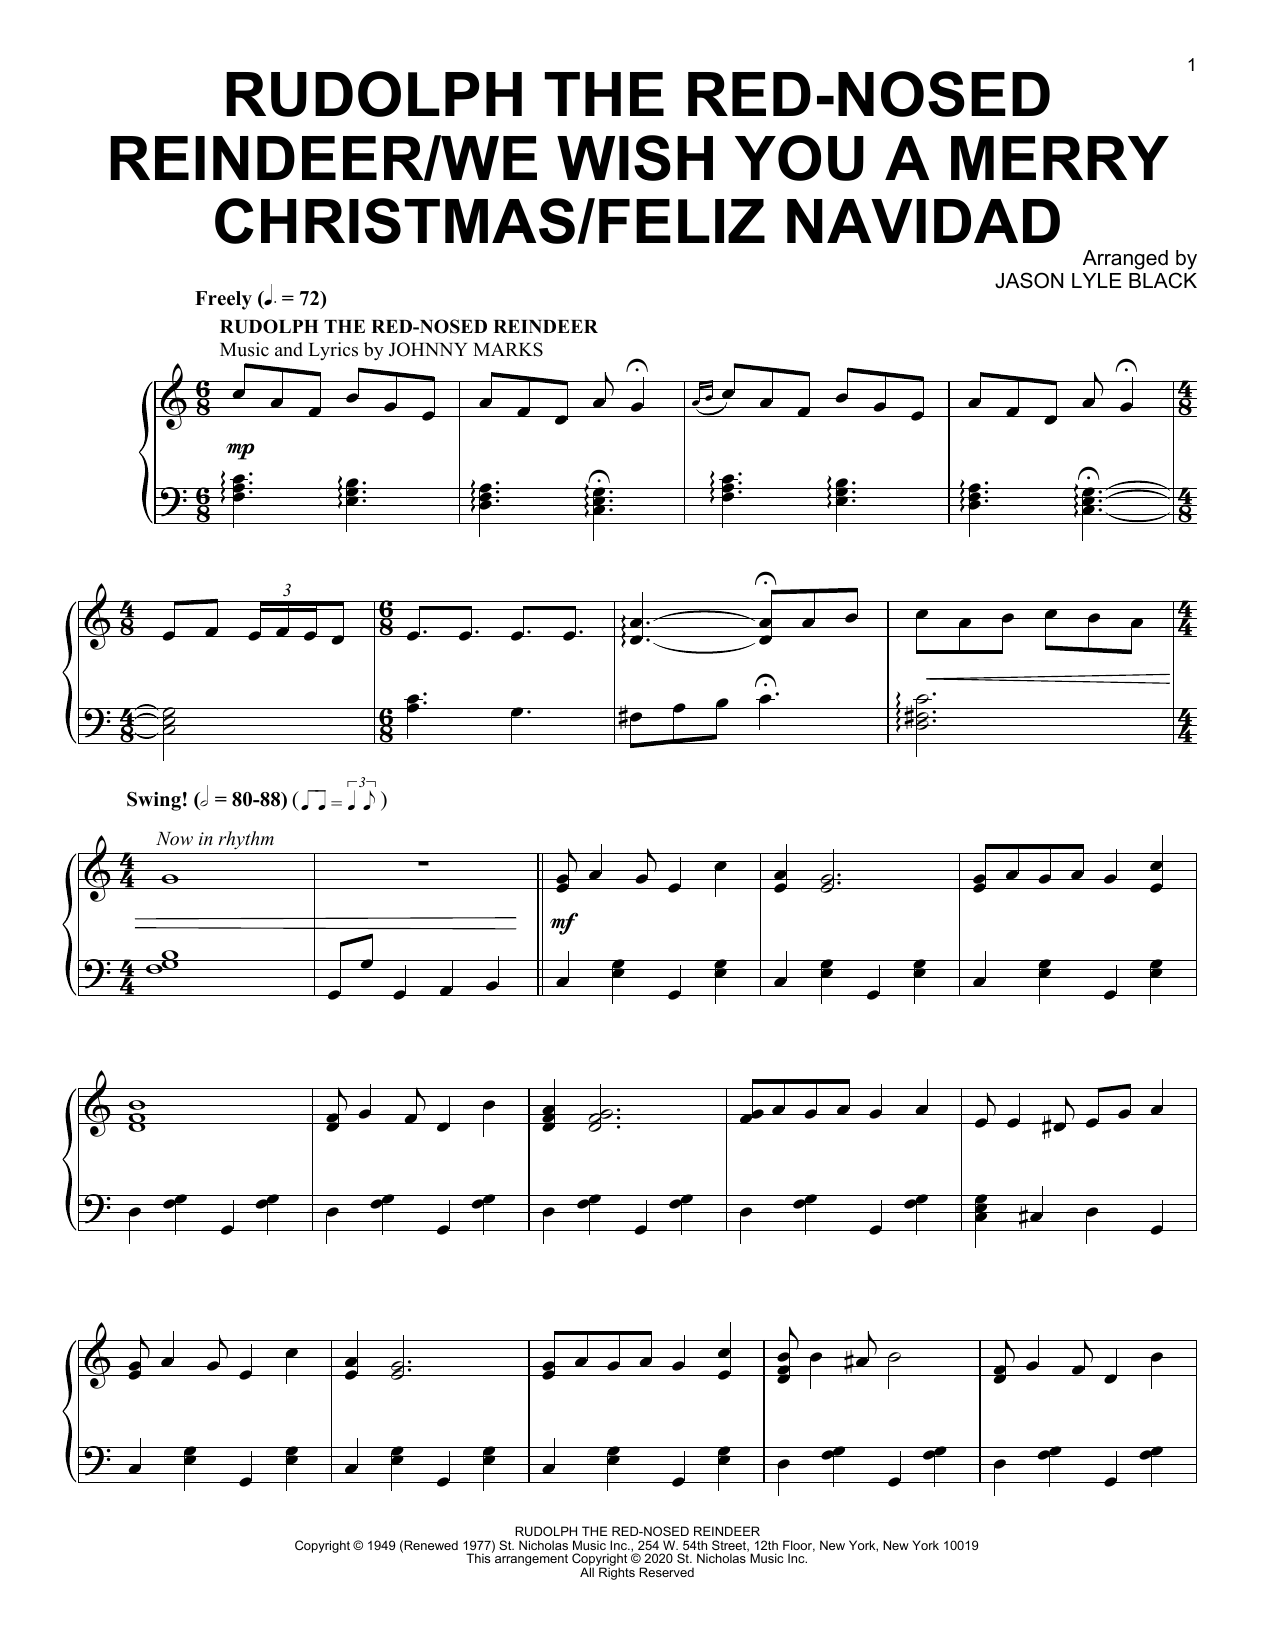 Rudolph The Red-Nosed Reindeer/We Wish You A Merry Christmas/Feliz Navidad (Piano Solo) von Jason Lyle Black